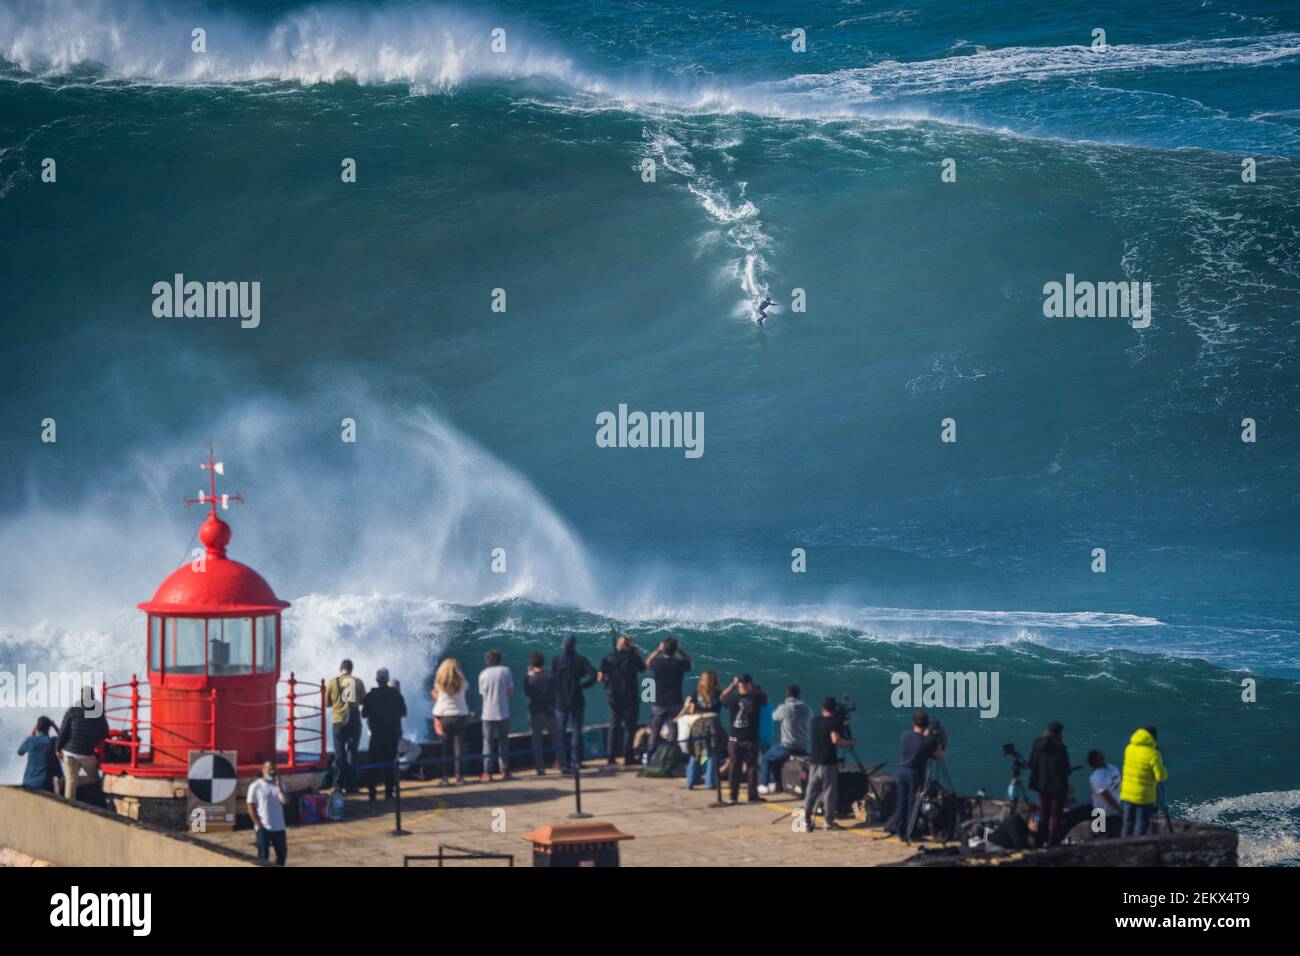 https://c8.alamy.com/comp/2EKX4T9/big-wave-surfer-pedro-scooby-from-brazil-rides-a-wave-during-a-tow-surfing-session-at-praia-do-norte-on-the-first-big-swell-of-winter-season-photo-by-henrique-casinhas-sopa-imagessipa-usa-2EKX4T9.jpg